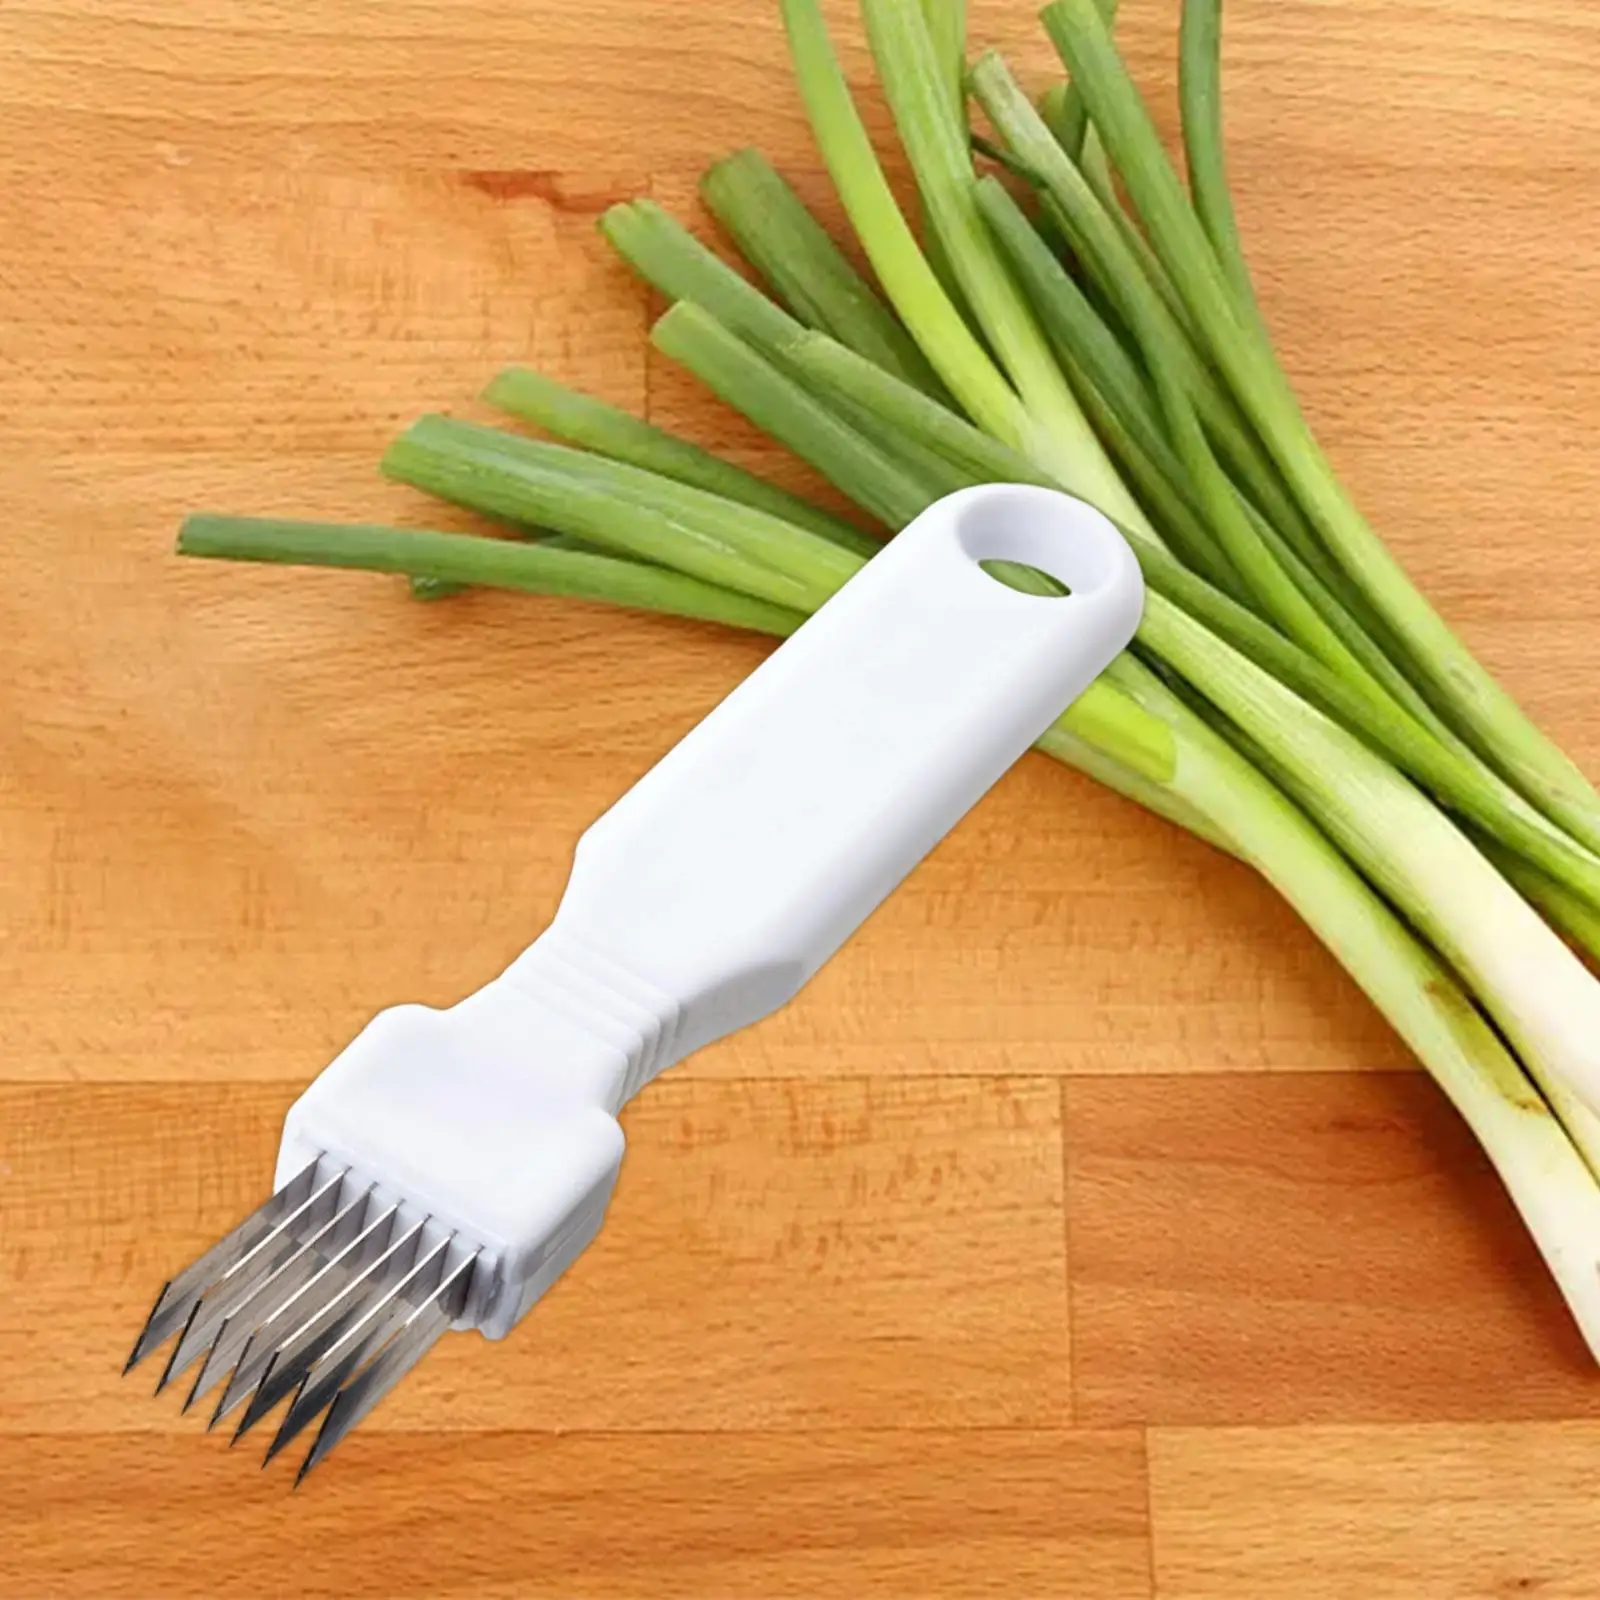 Garlic Cutter Graters Kitchen Accessories Stainless Steel Food Chopper Scallion Shredder for Ginger Tomato Carrots Onions Garlic